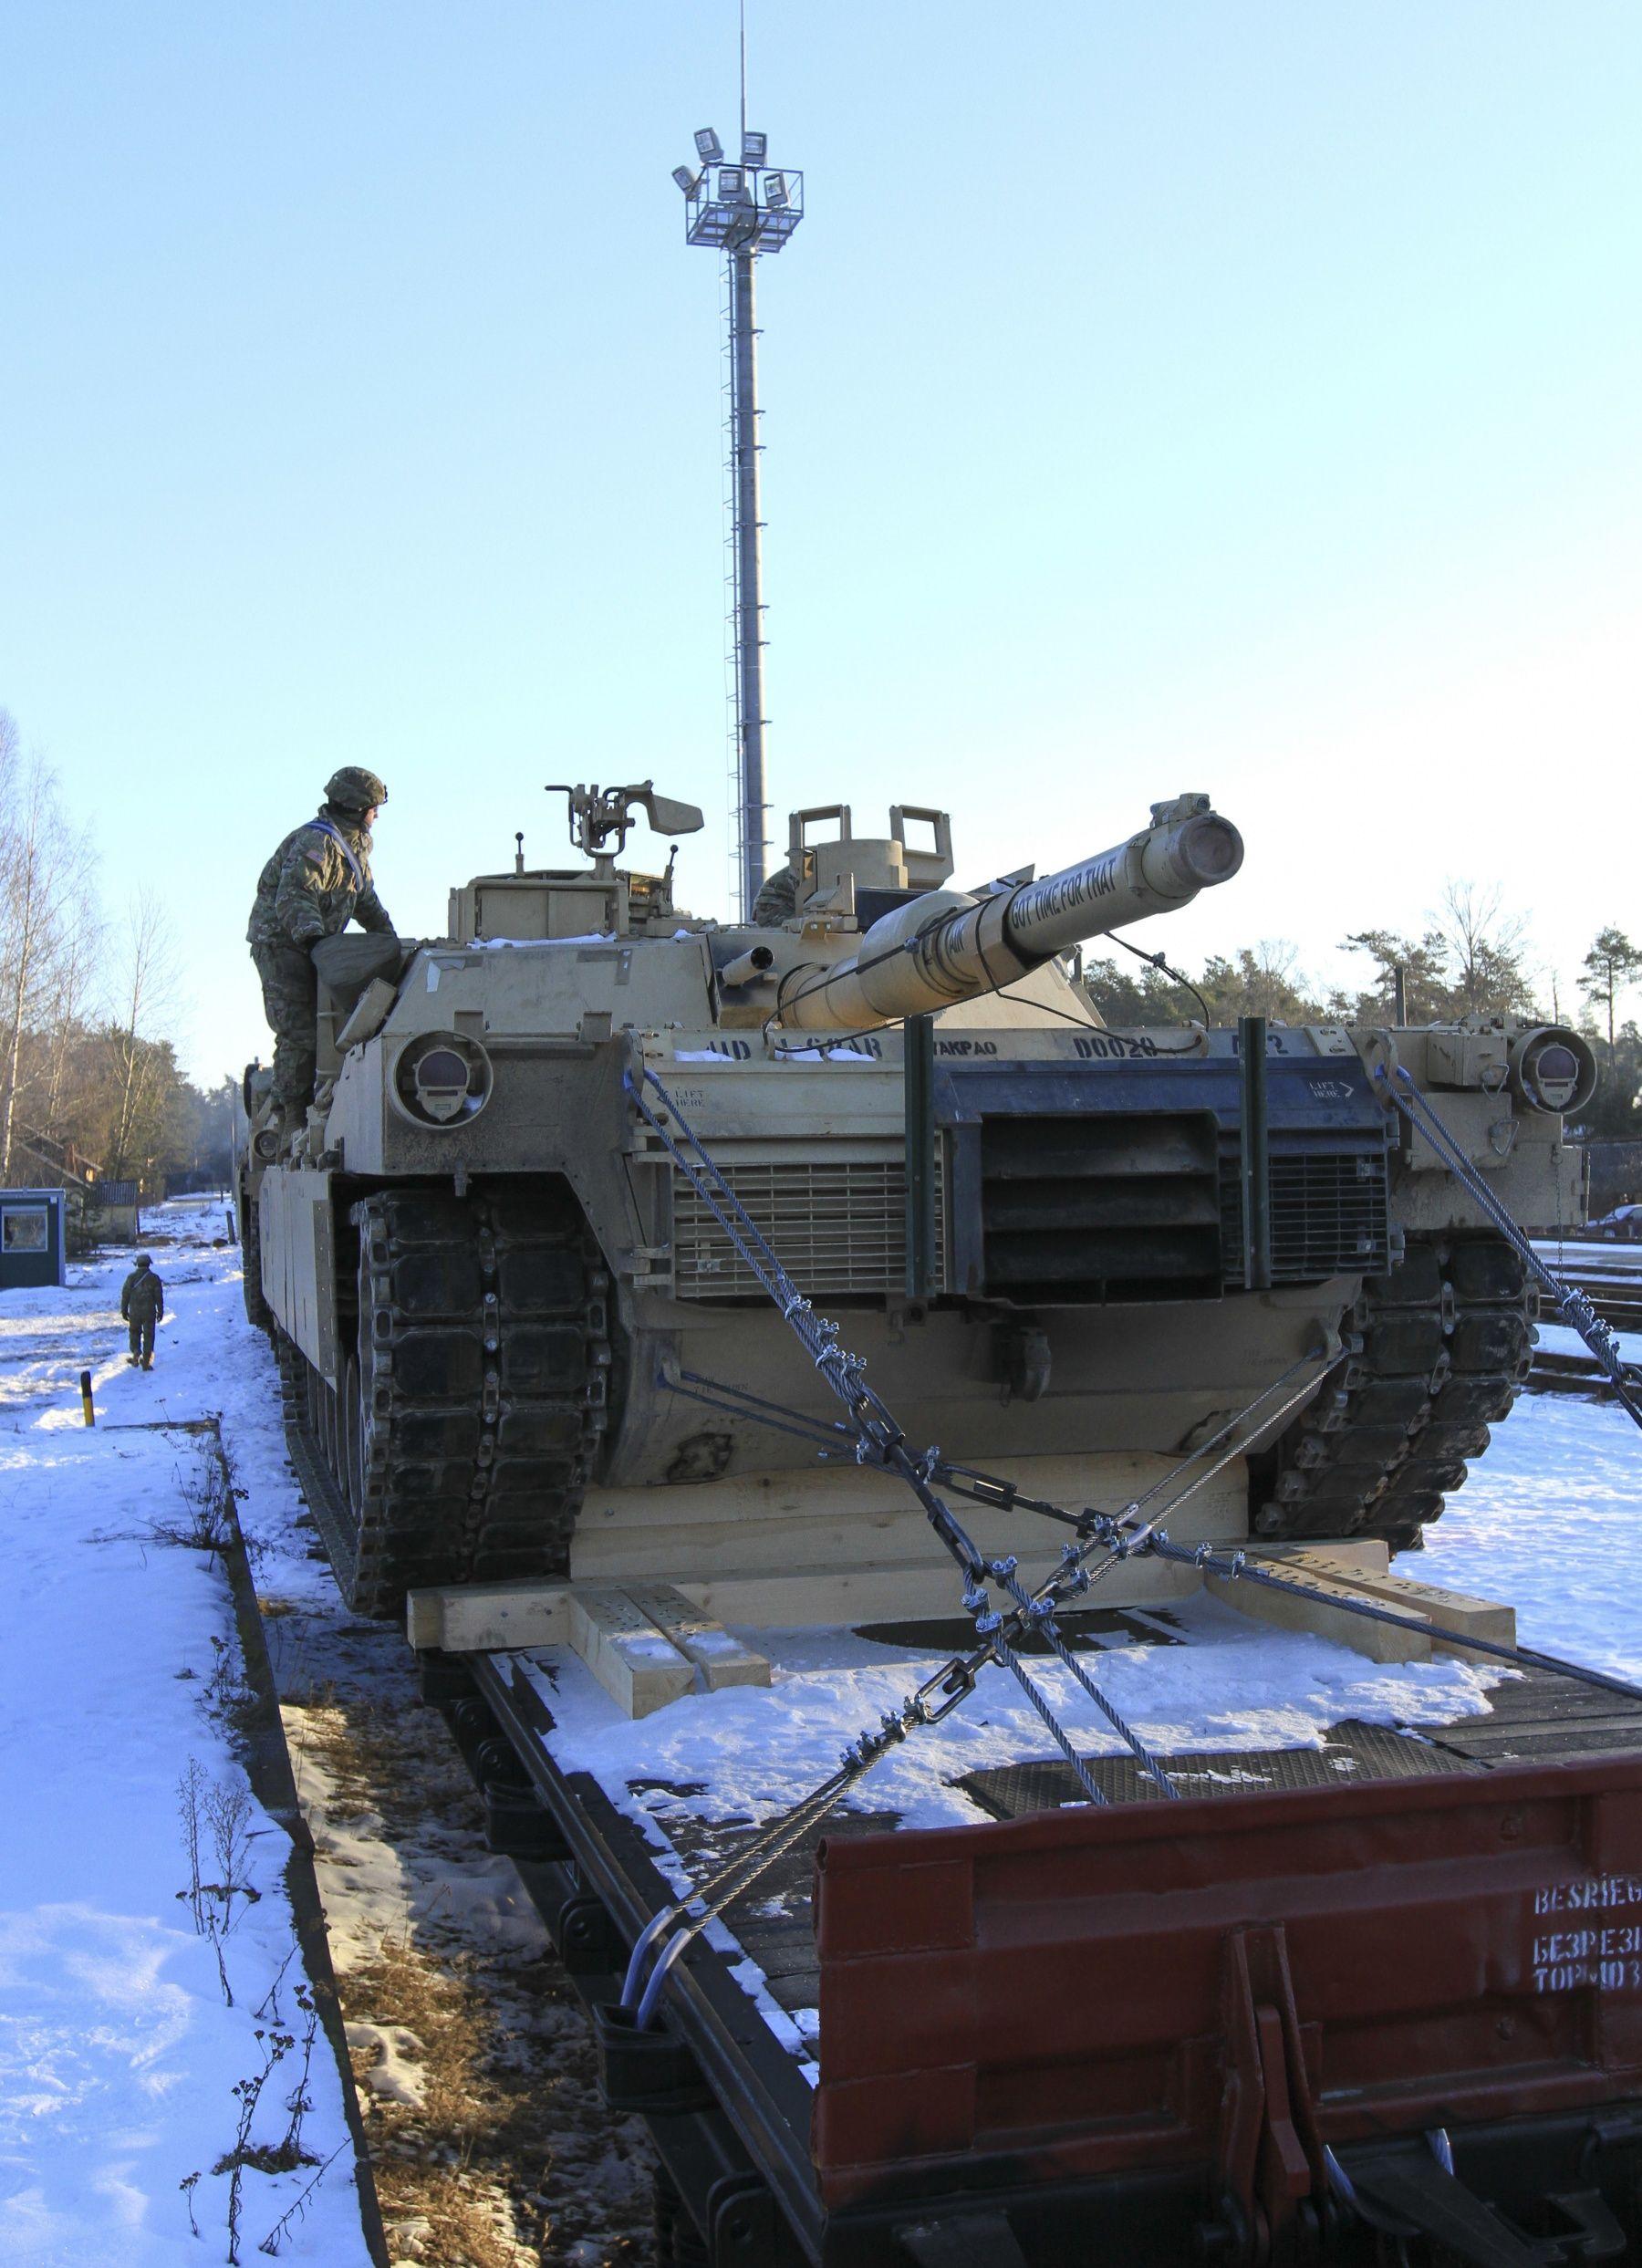 1-68 AR Silver Lion Logo - 1 68 AR Tracks On Ground In Latvia. Article. The United States Army